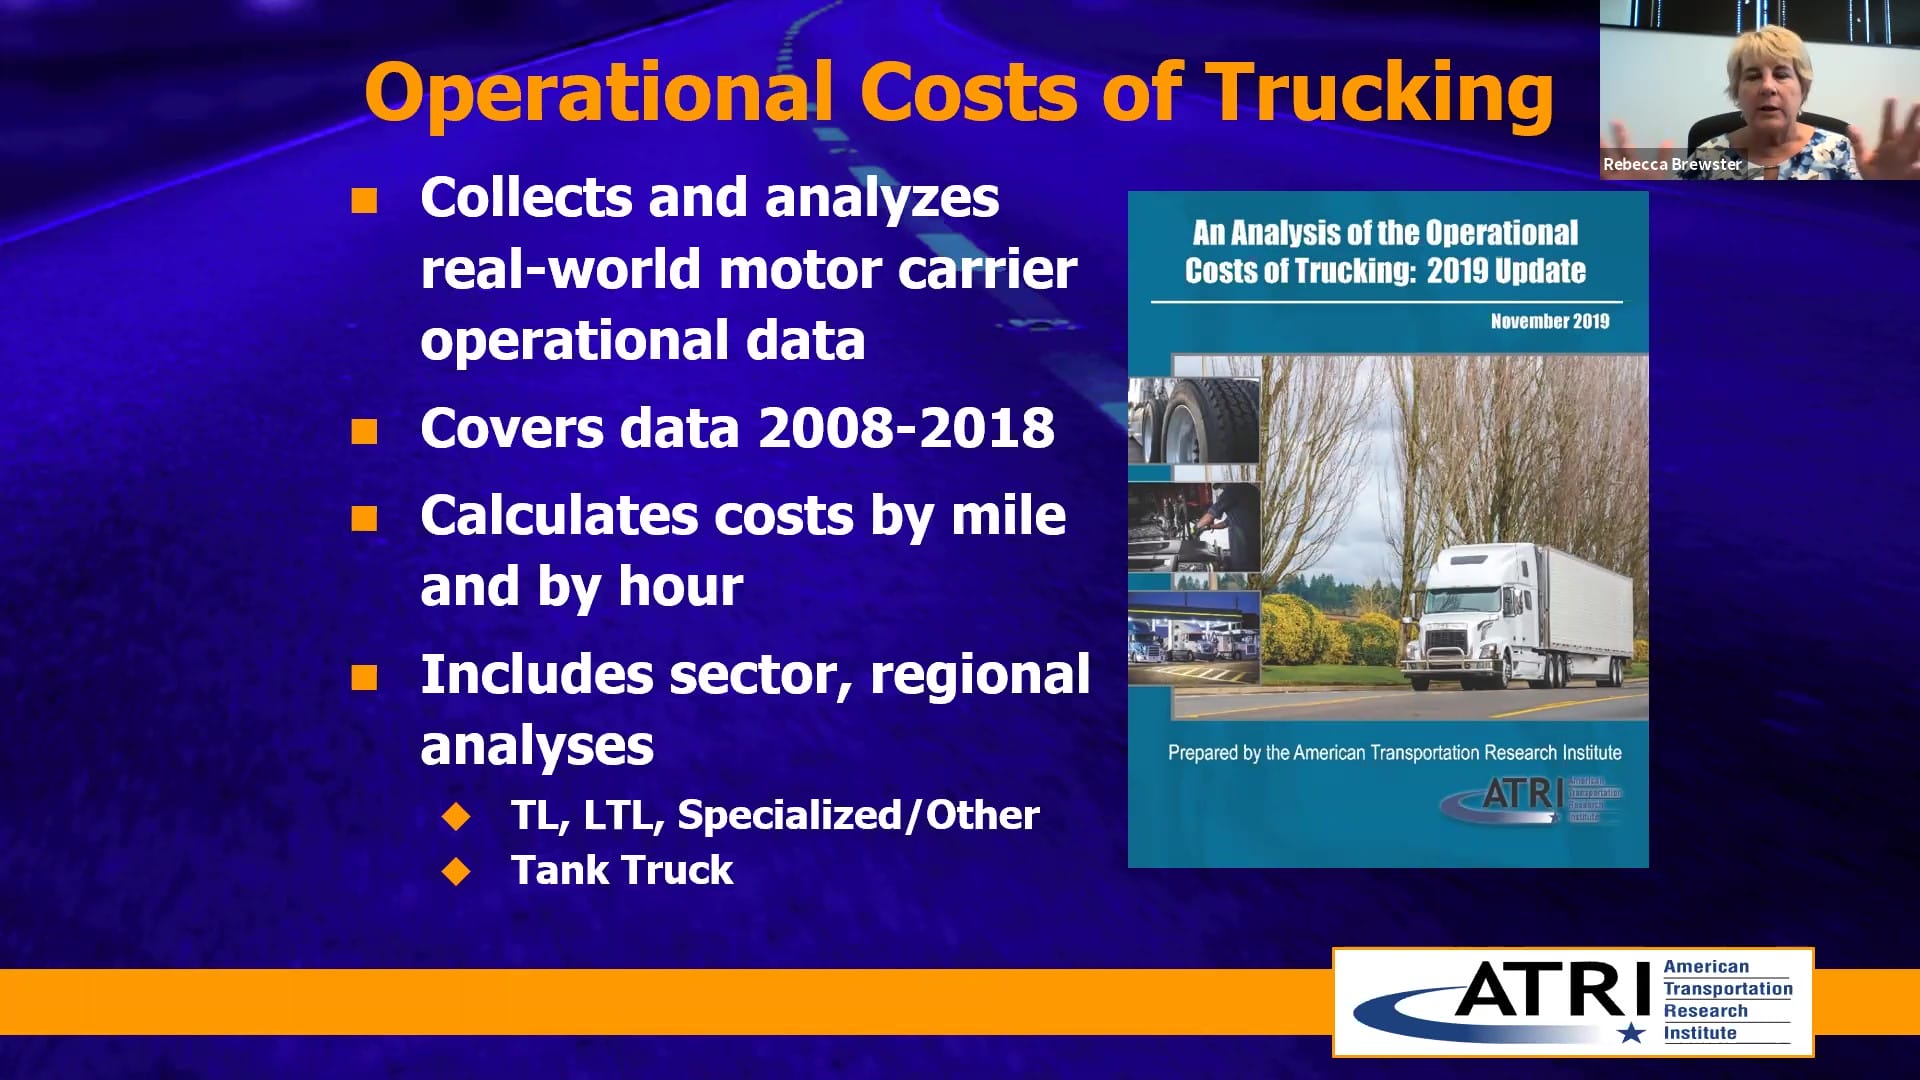 Trucking Industry Concerns 2020 from ATRI Operational Costs of Trucking